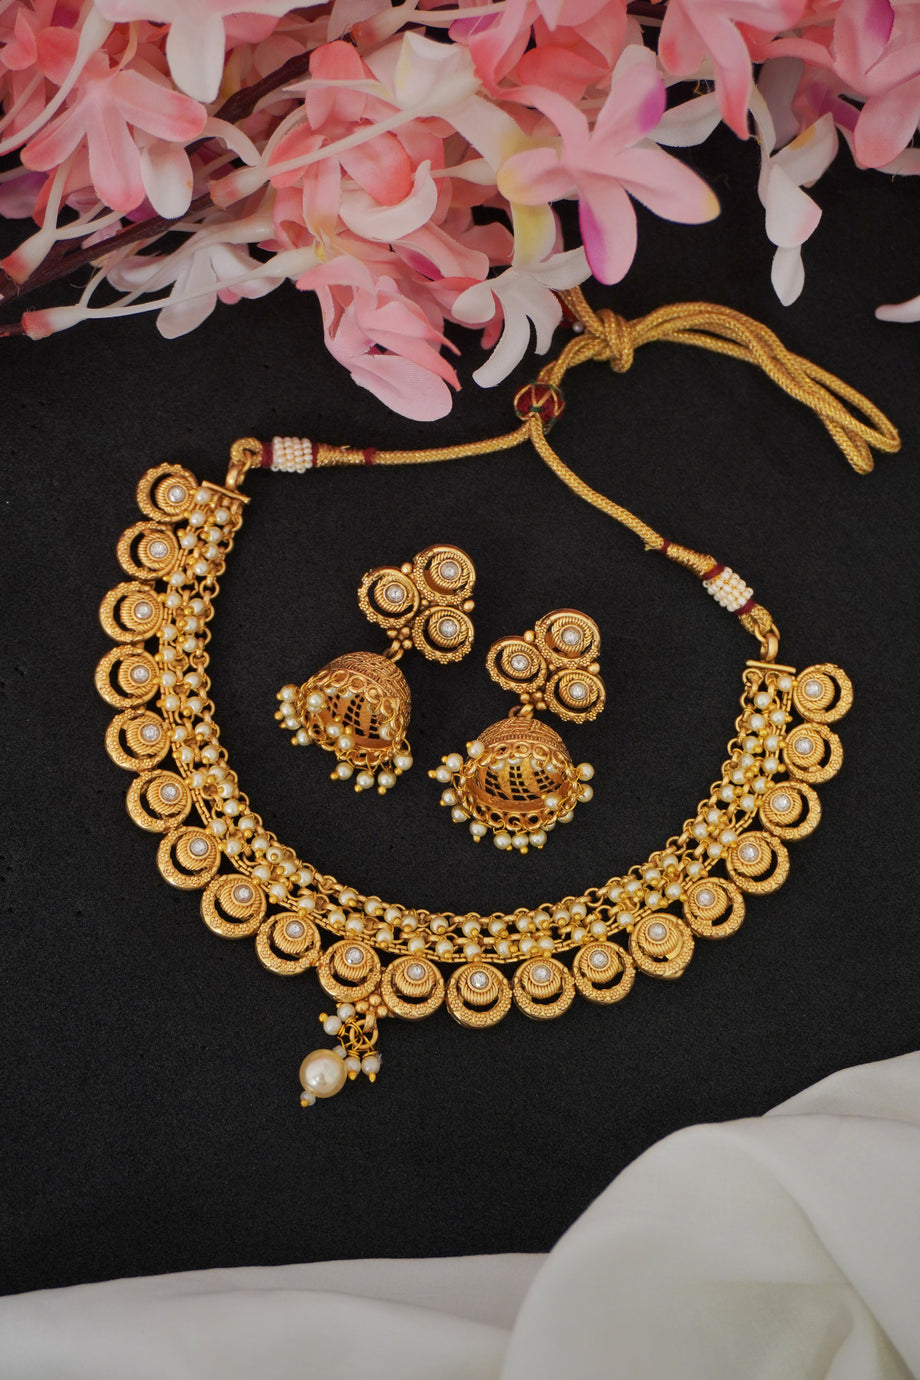 Rose 18K Gold Clavicle Chain Necklace High Quality Womens Jewelry Pendant  With Colorful Elisa Gold Pendant Necklace Perfect Gift For Valentines Day  From Vibrator_player, $47.44 | DHgate.Com